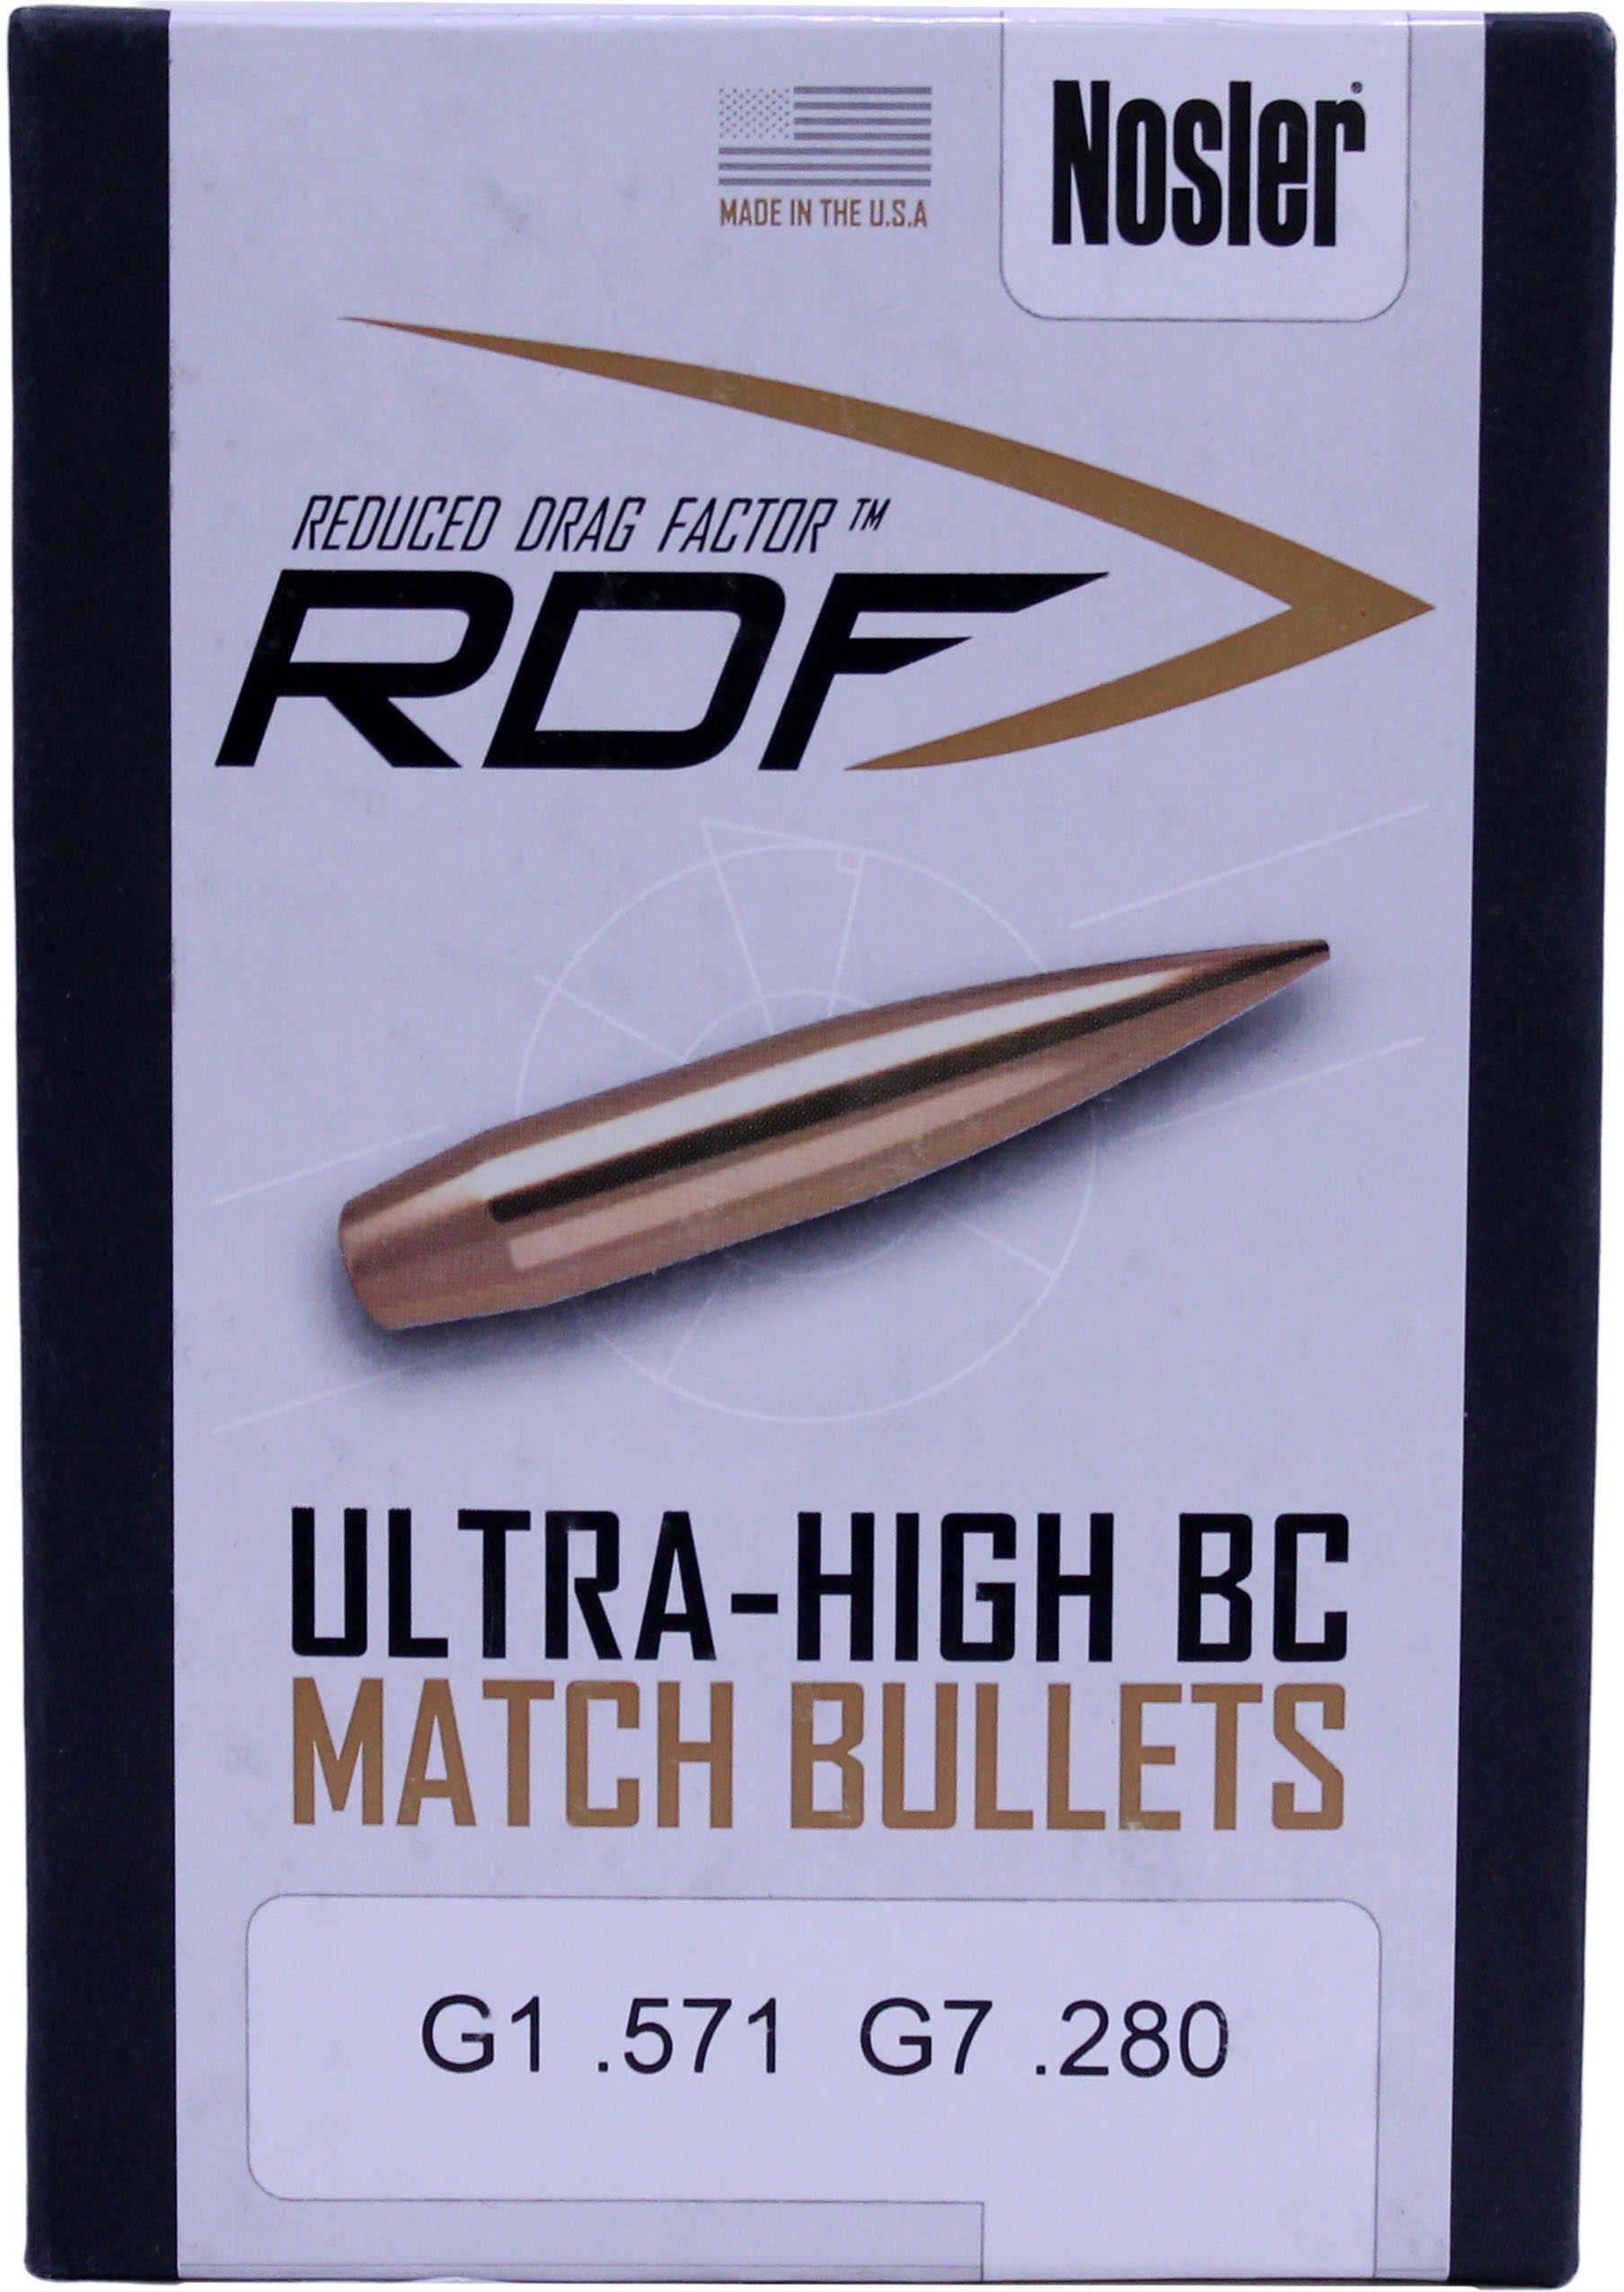 Nosler RDF 6mm, 105 Grain, Jacketed Hollow Point Reloading Bullets, 500 Per Box Md: 53411